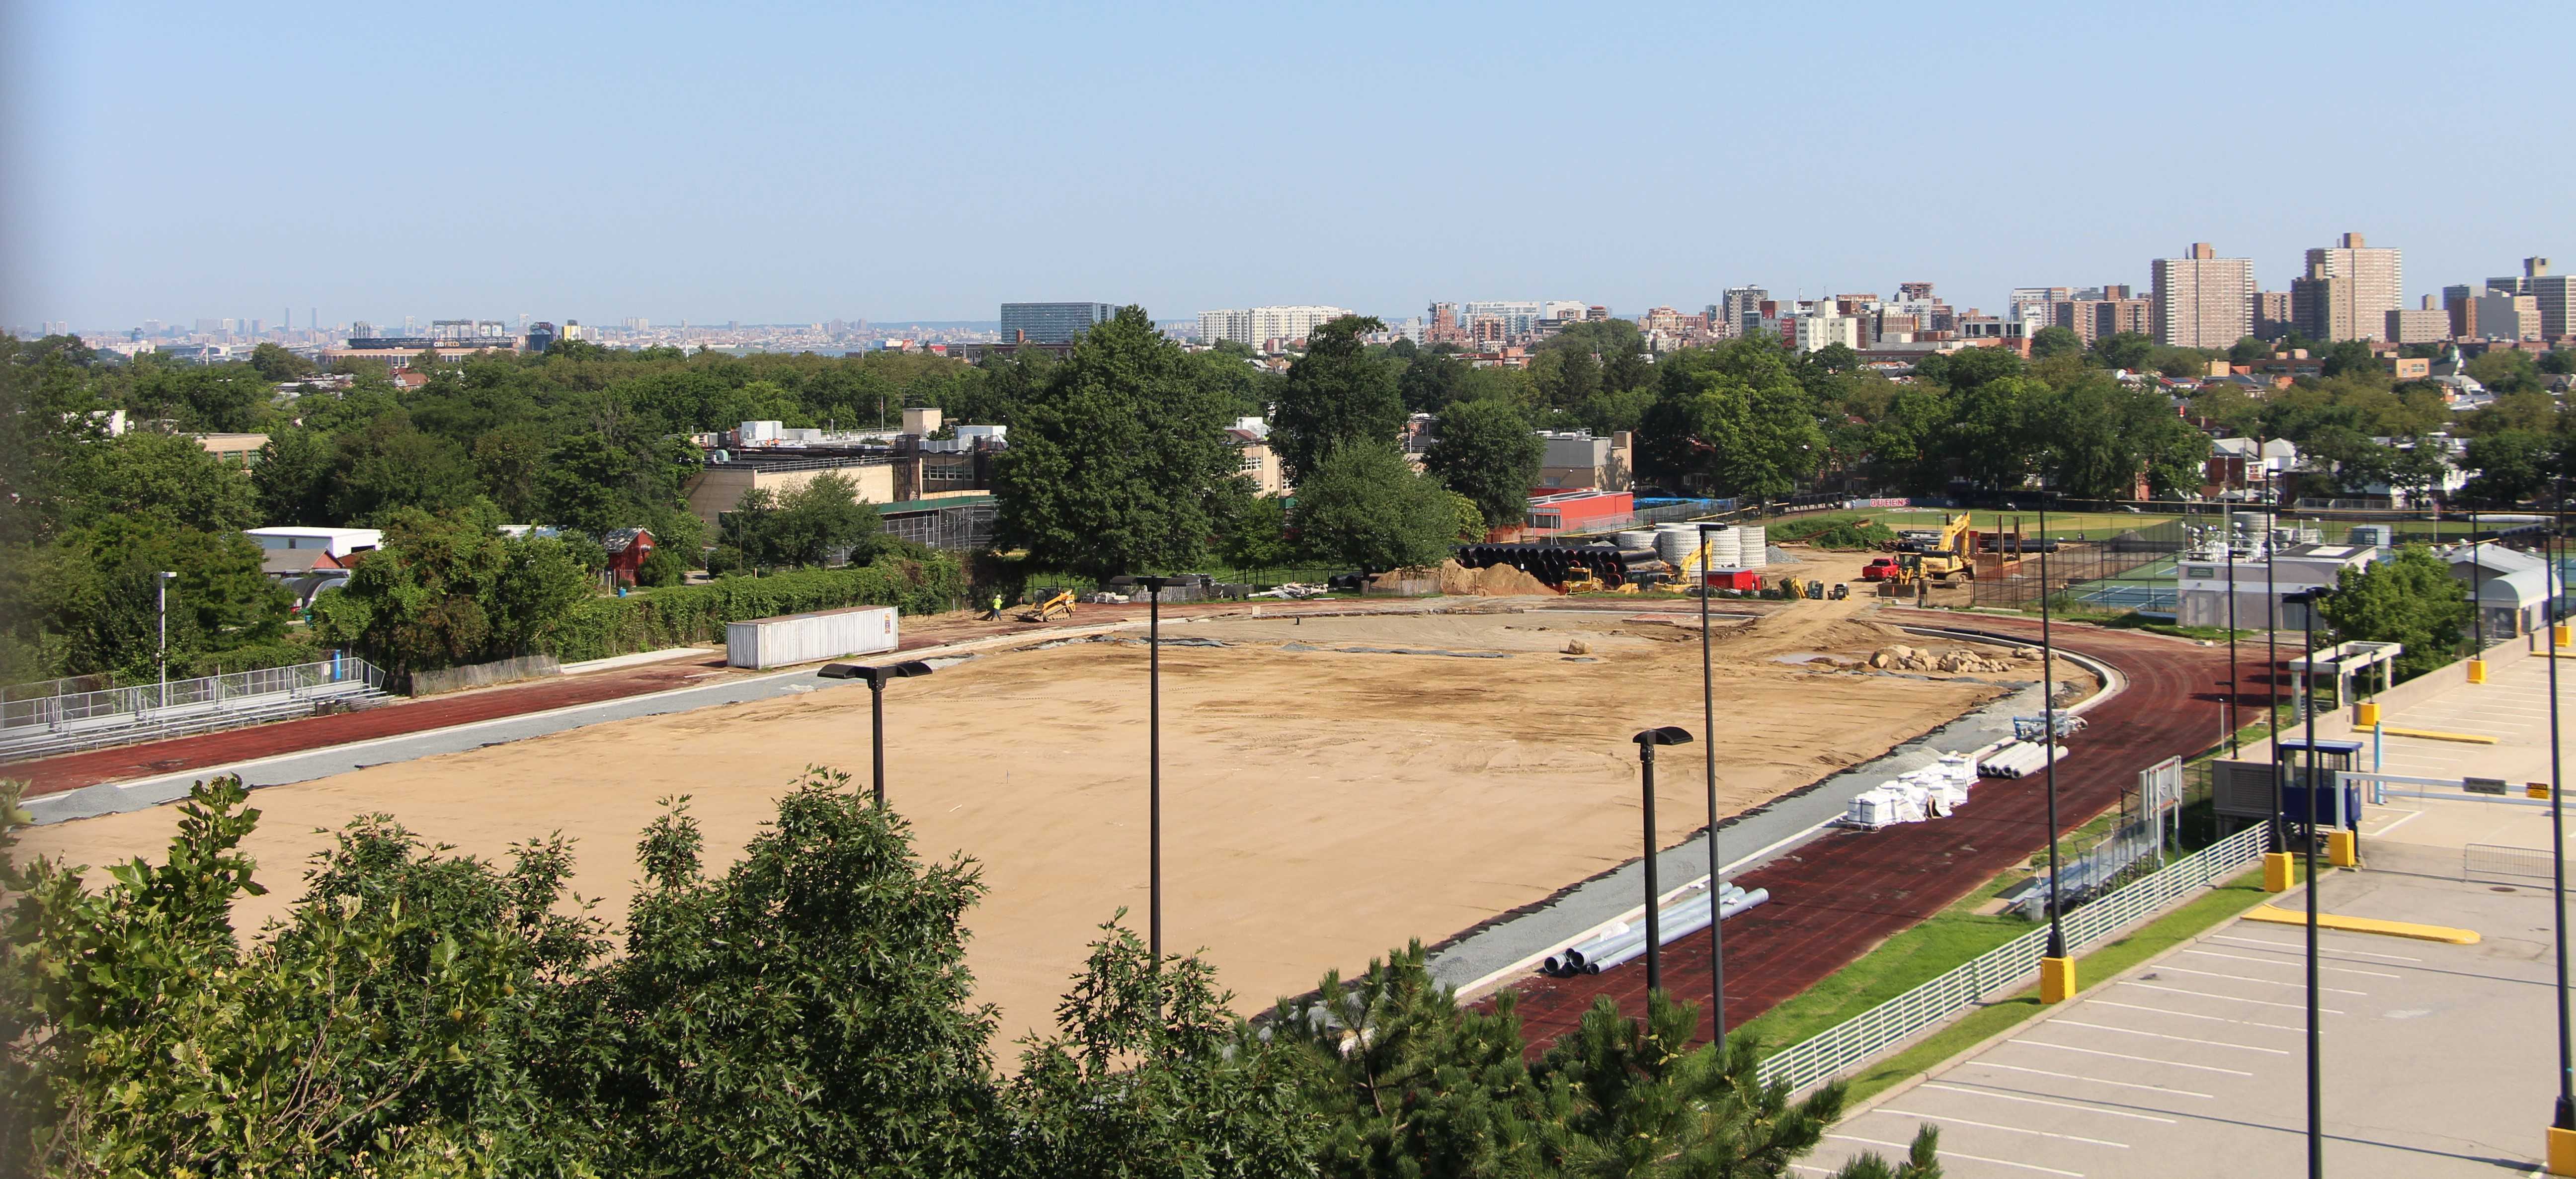 Renovations underway for the Queens College track and field